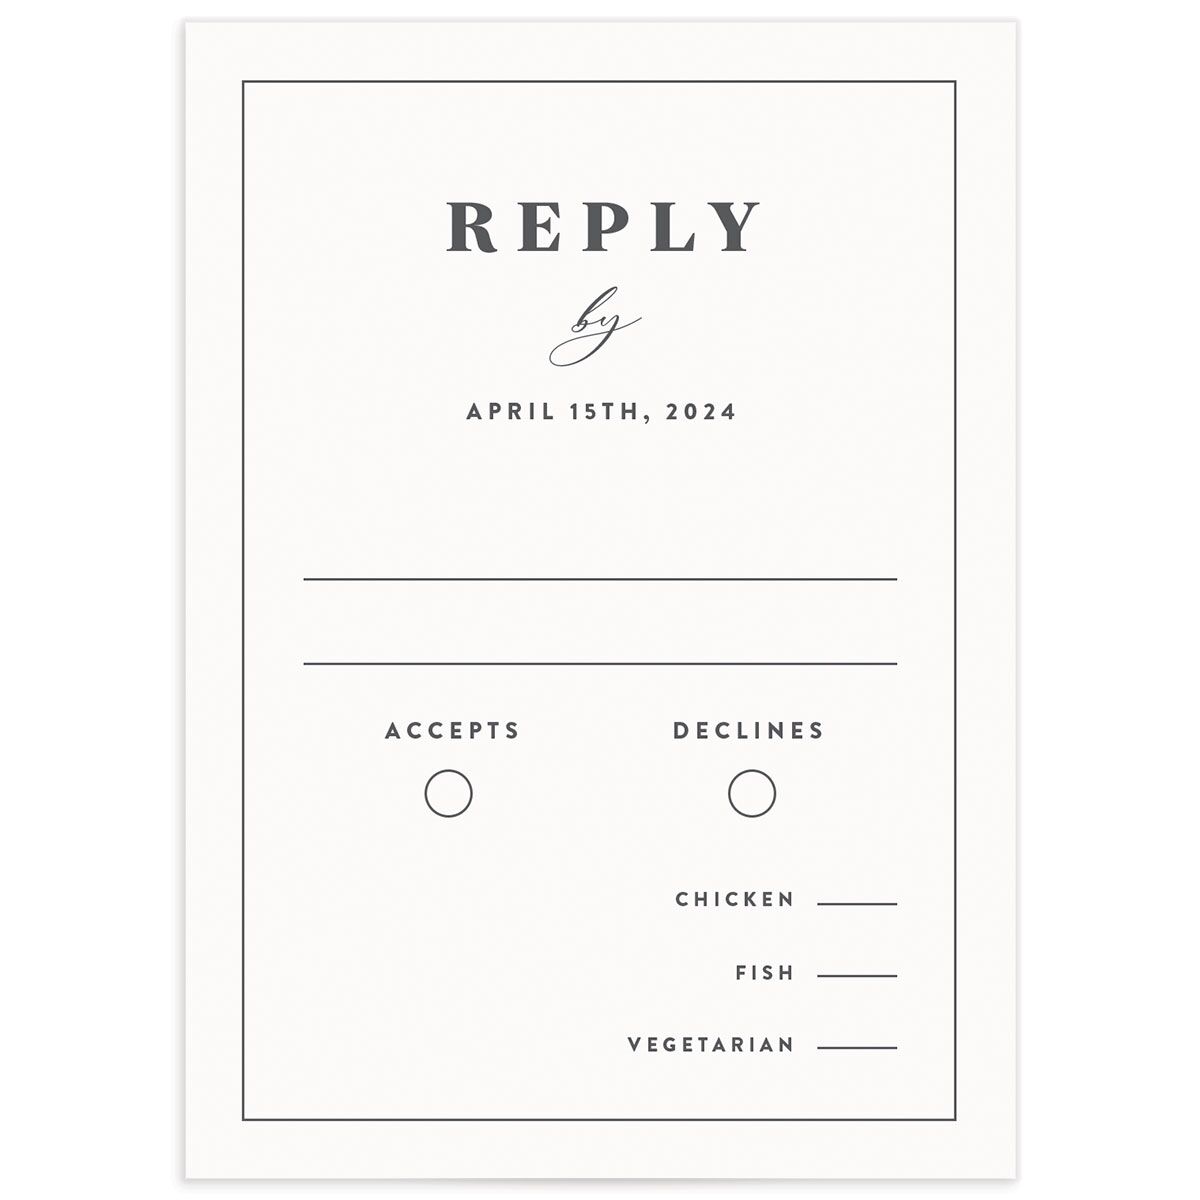 A Wedding Response Card from the Retro Botanical Collection